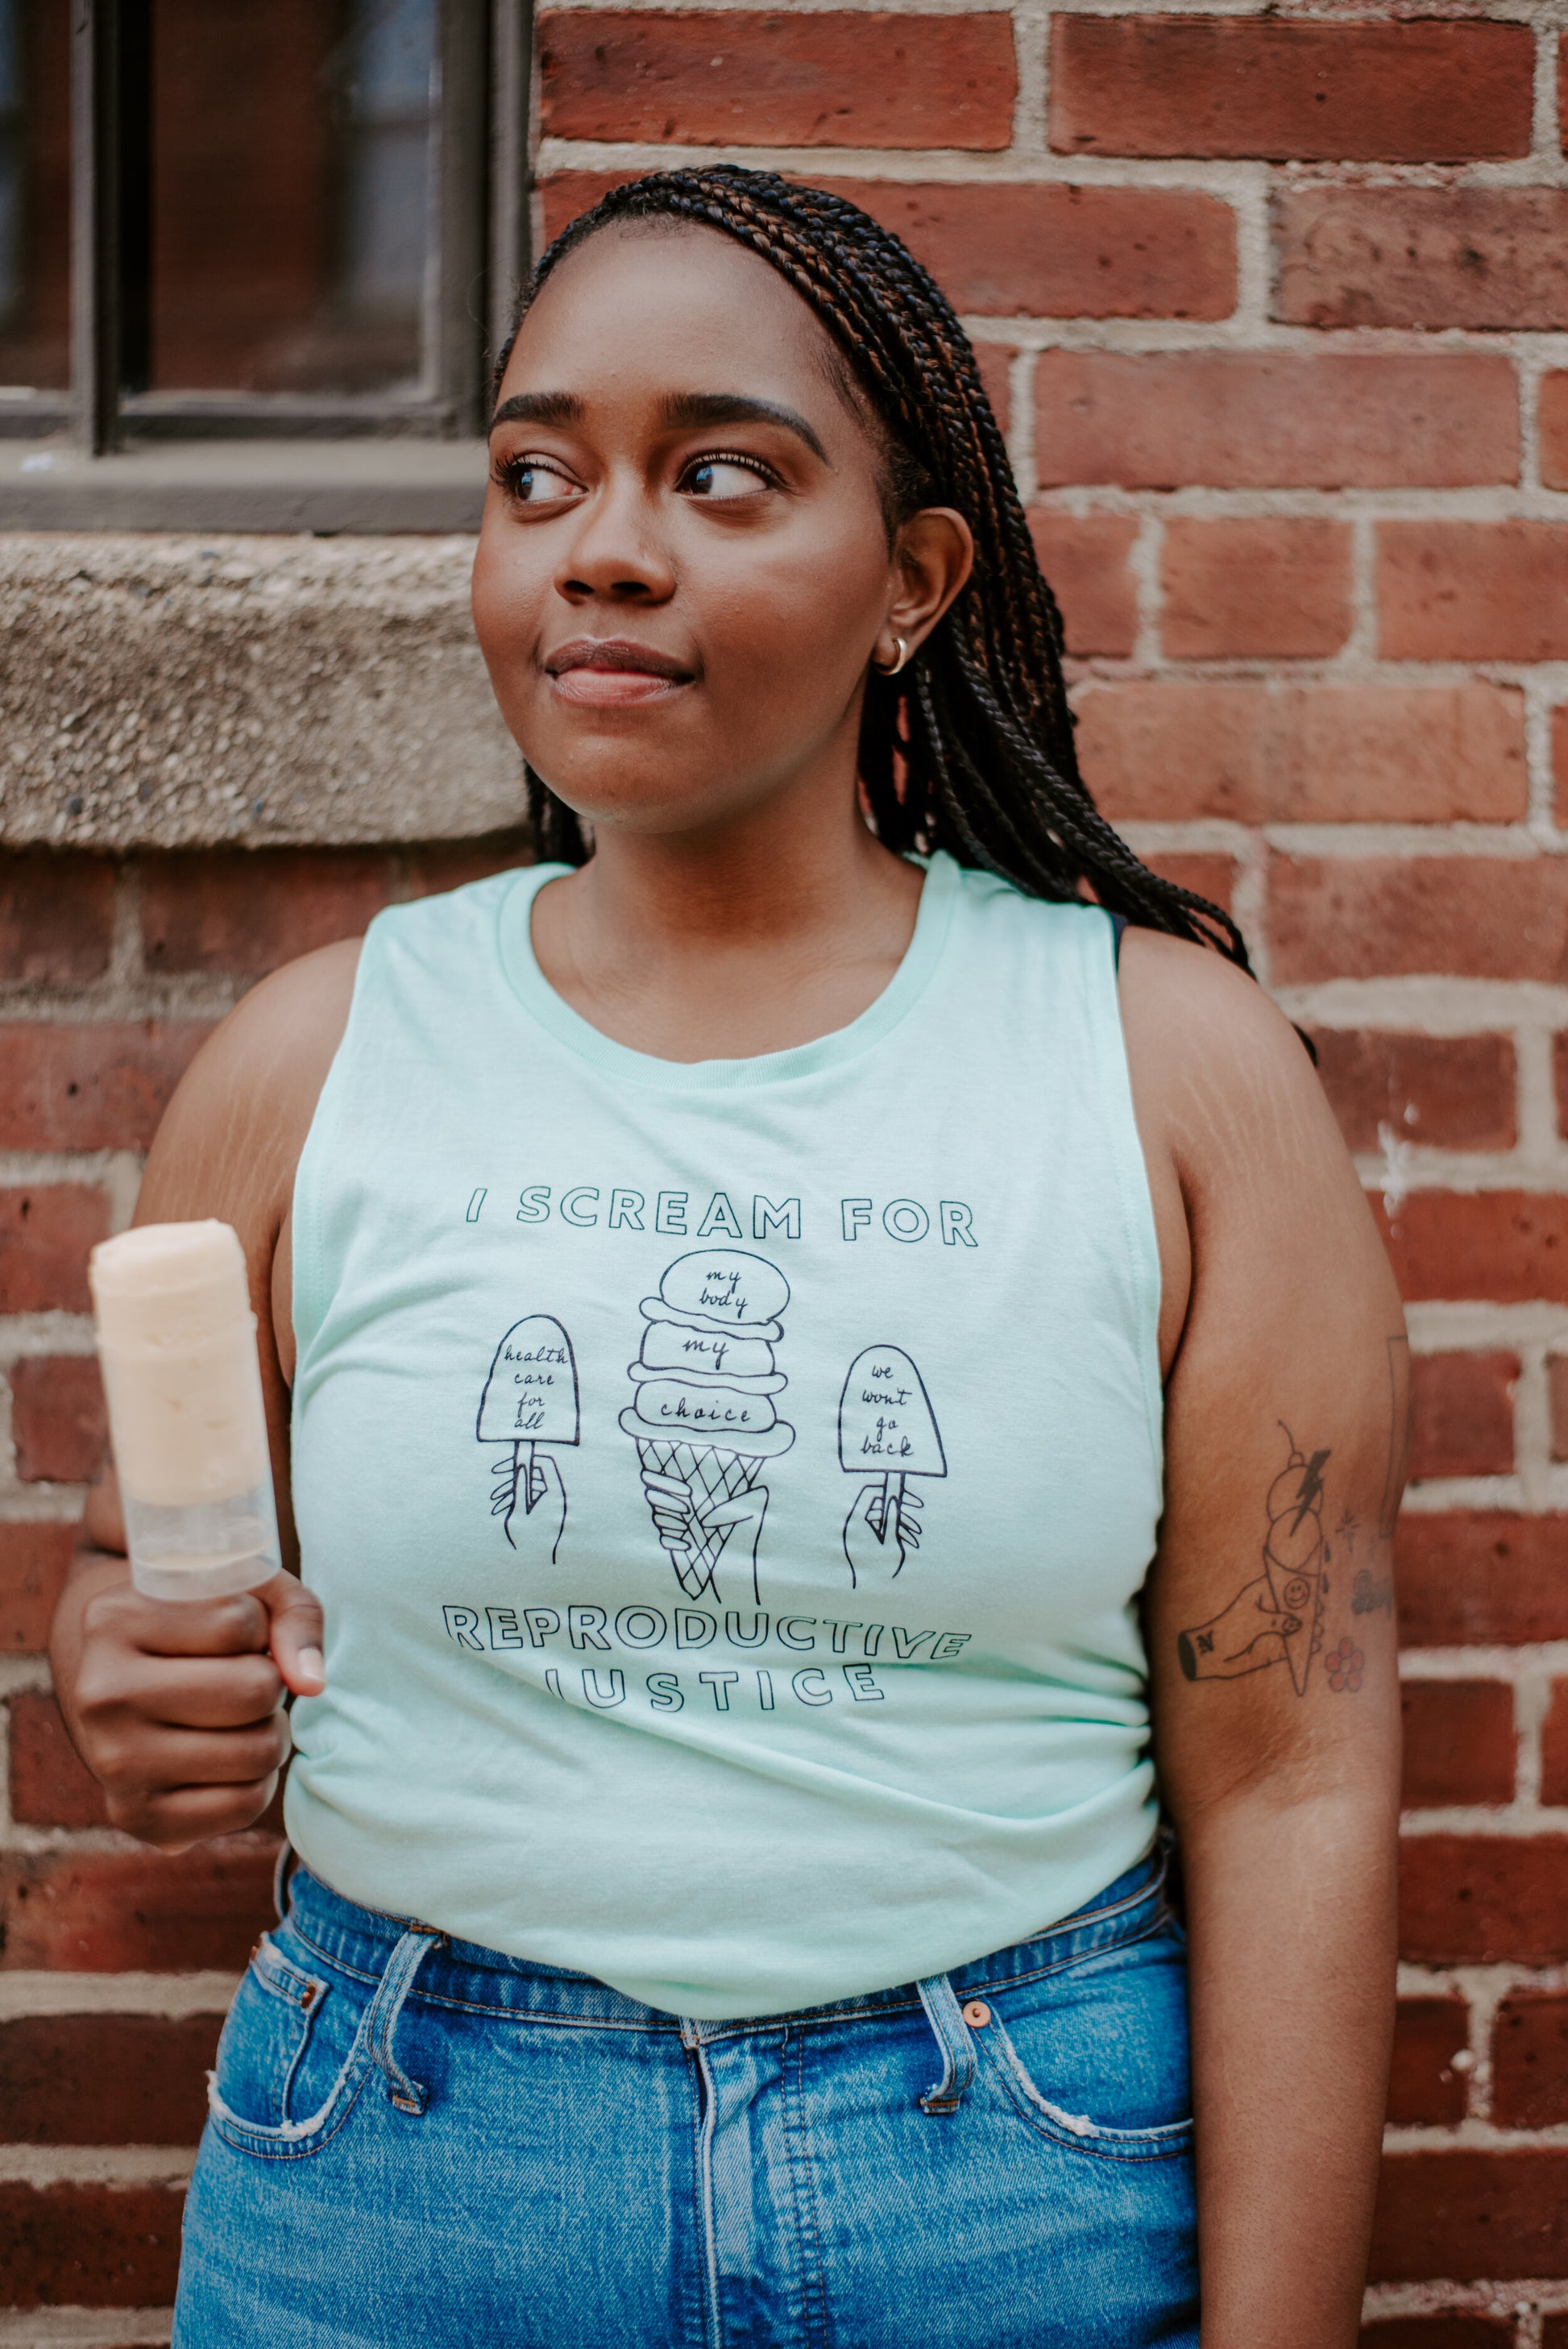 A woman wears a mint green tank that reads I Scream for Reproductive Justice and holds a frozen confection